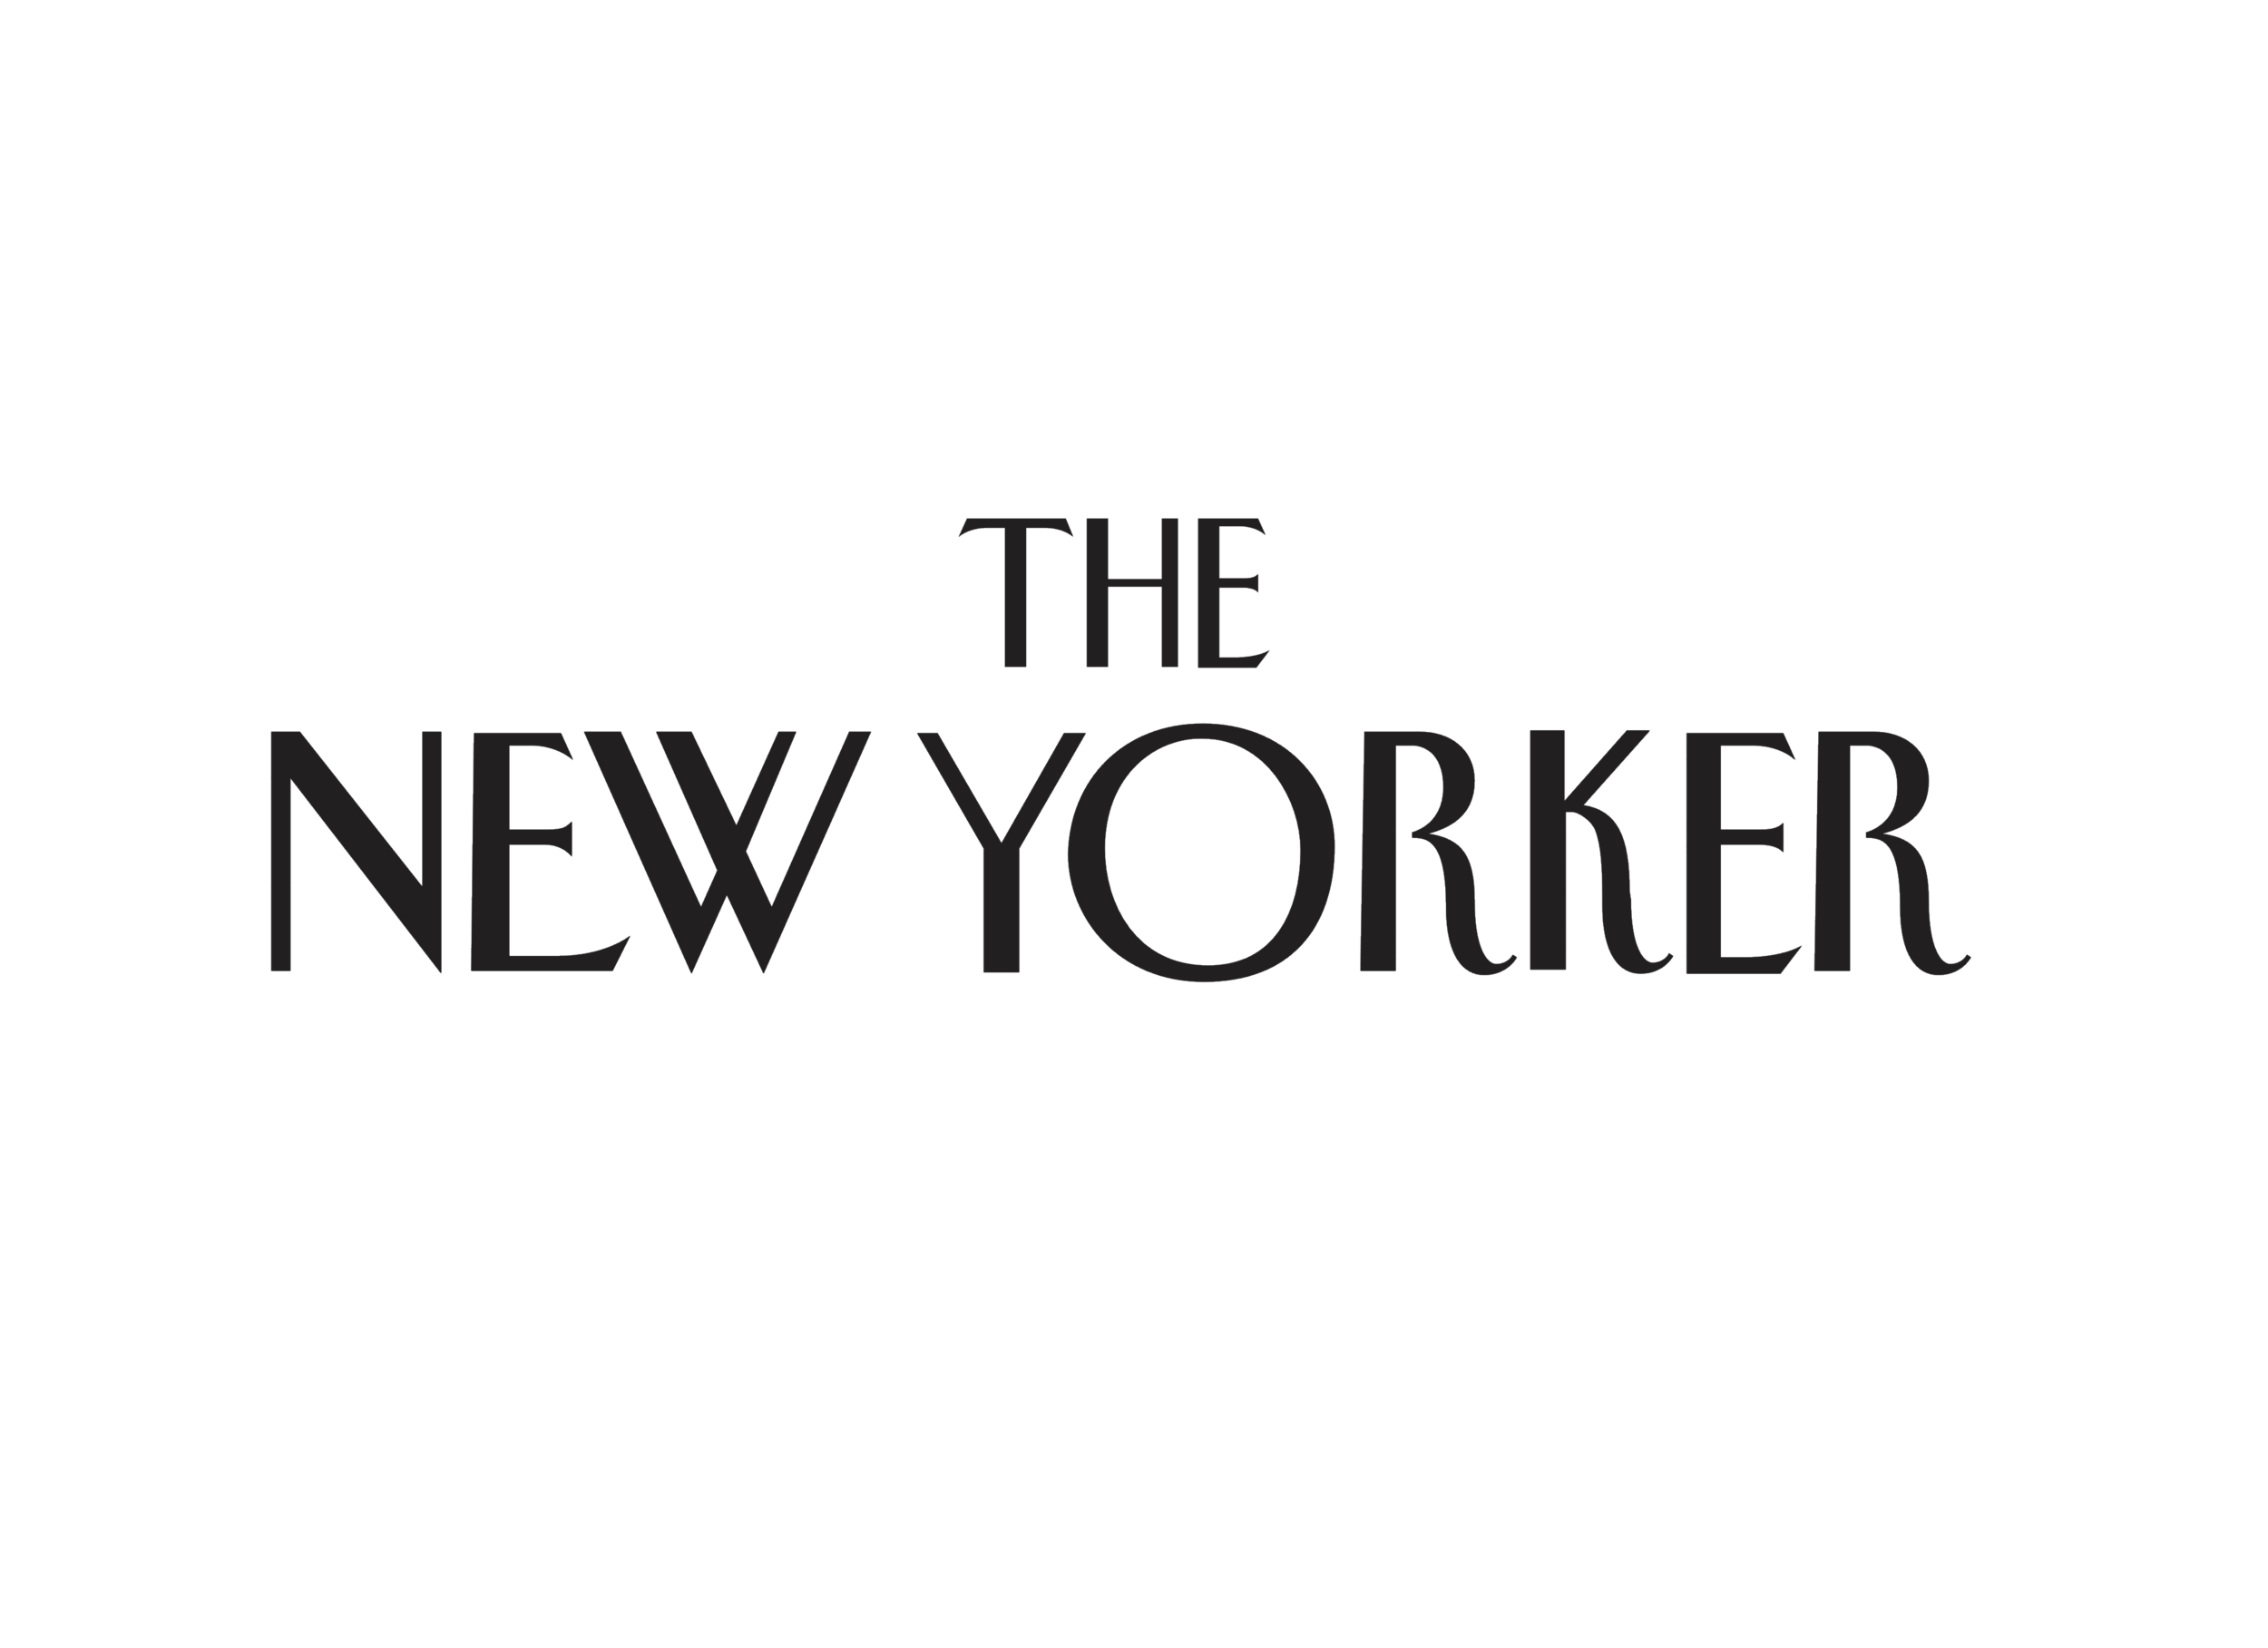 The_New_Yorker_logo.png